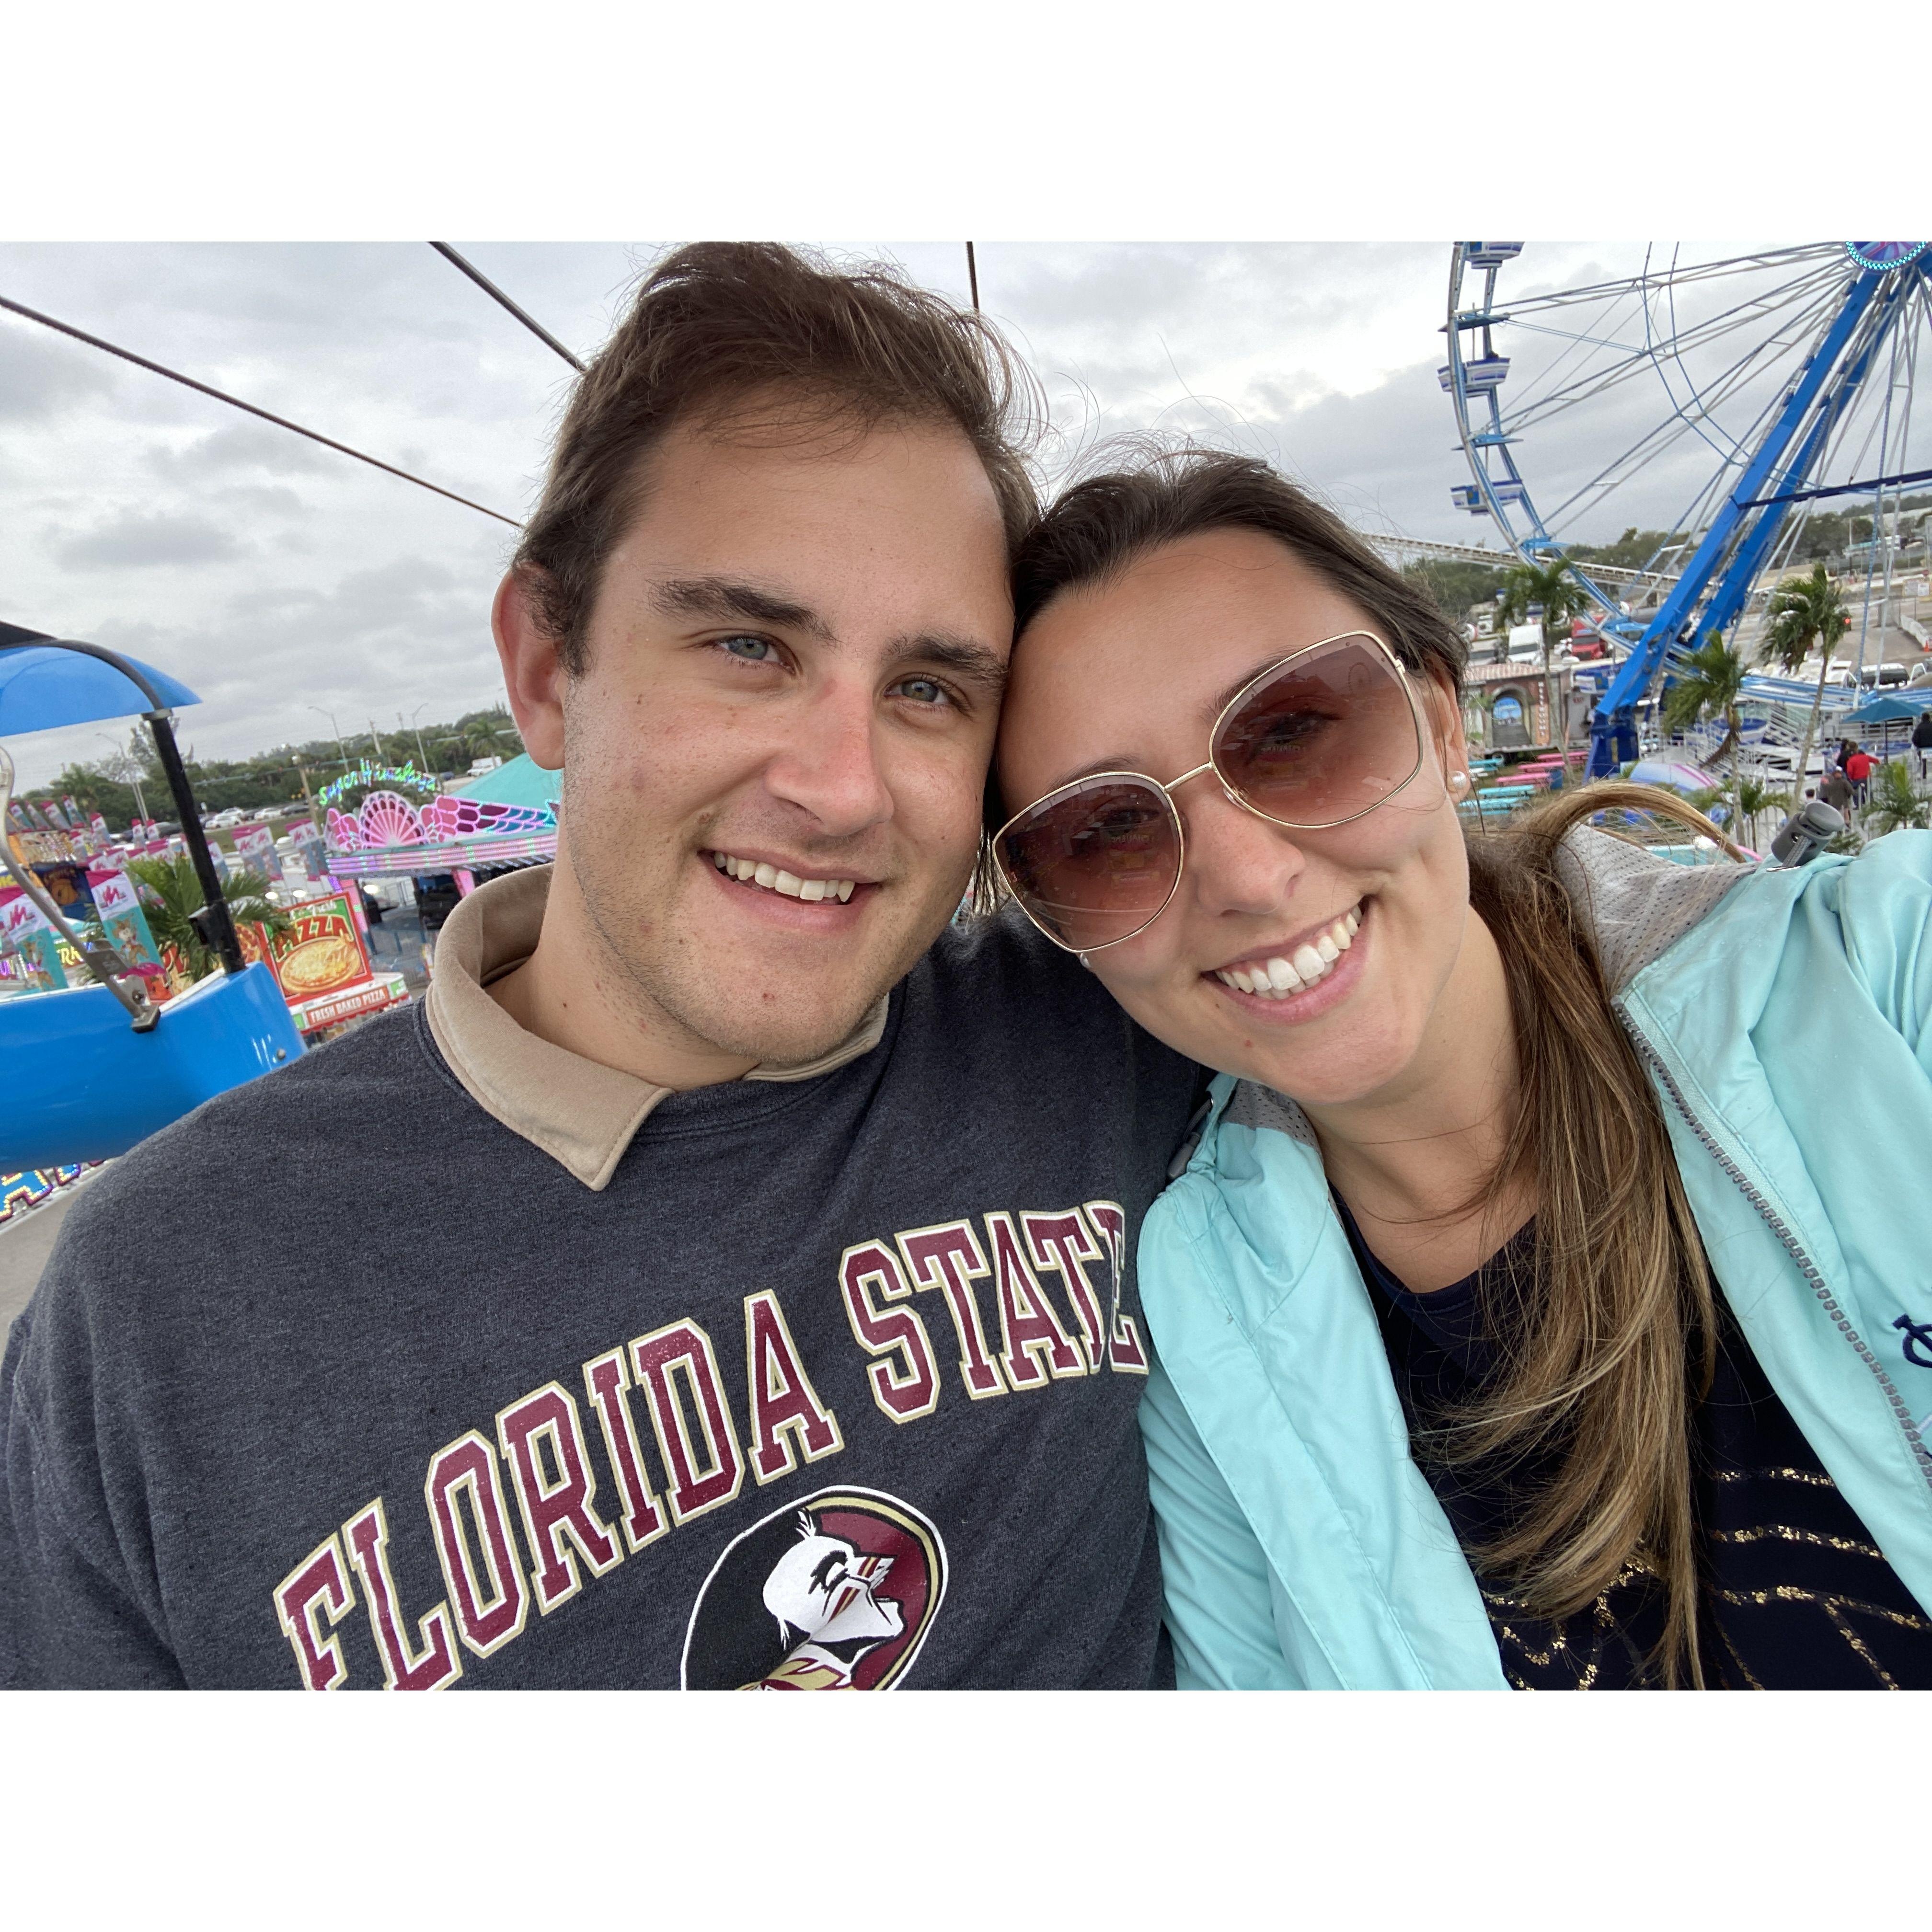 Despite Fred's strong dislike of amusement parks and carnivals, Fred takes Jordan to the South Florida Fair! The two share a kiss at the top of the Ferris wheel!